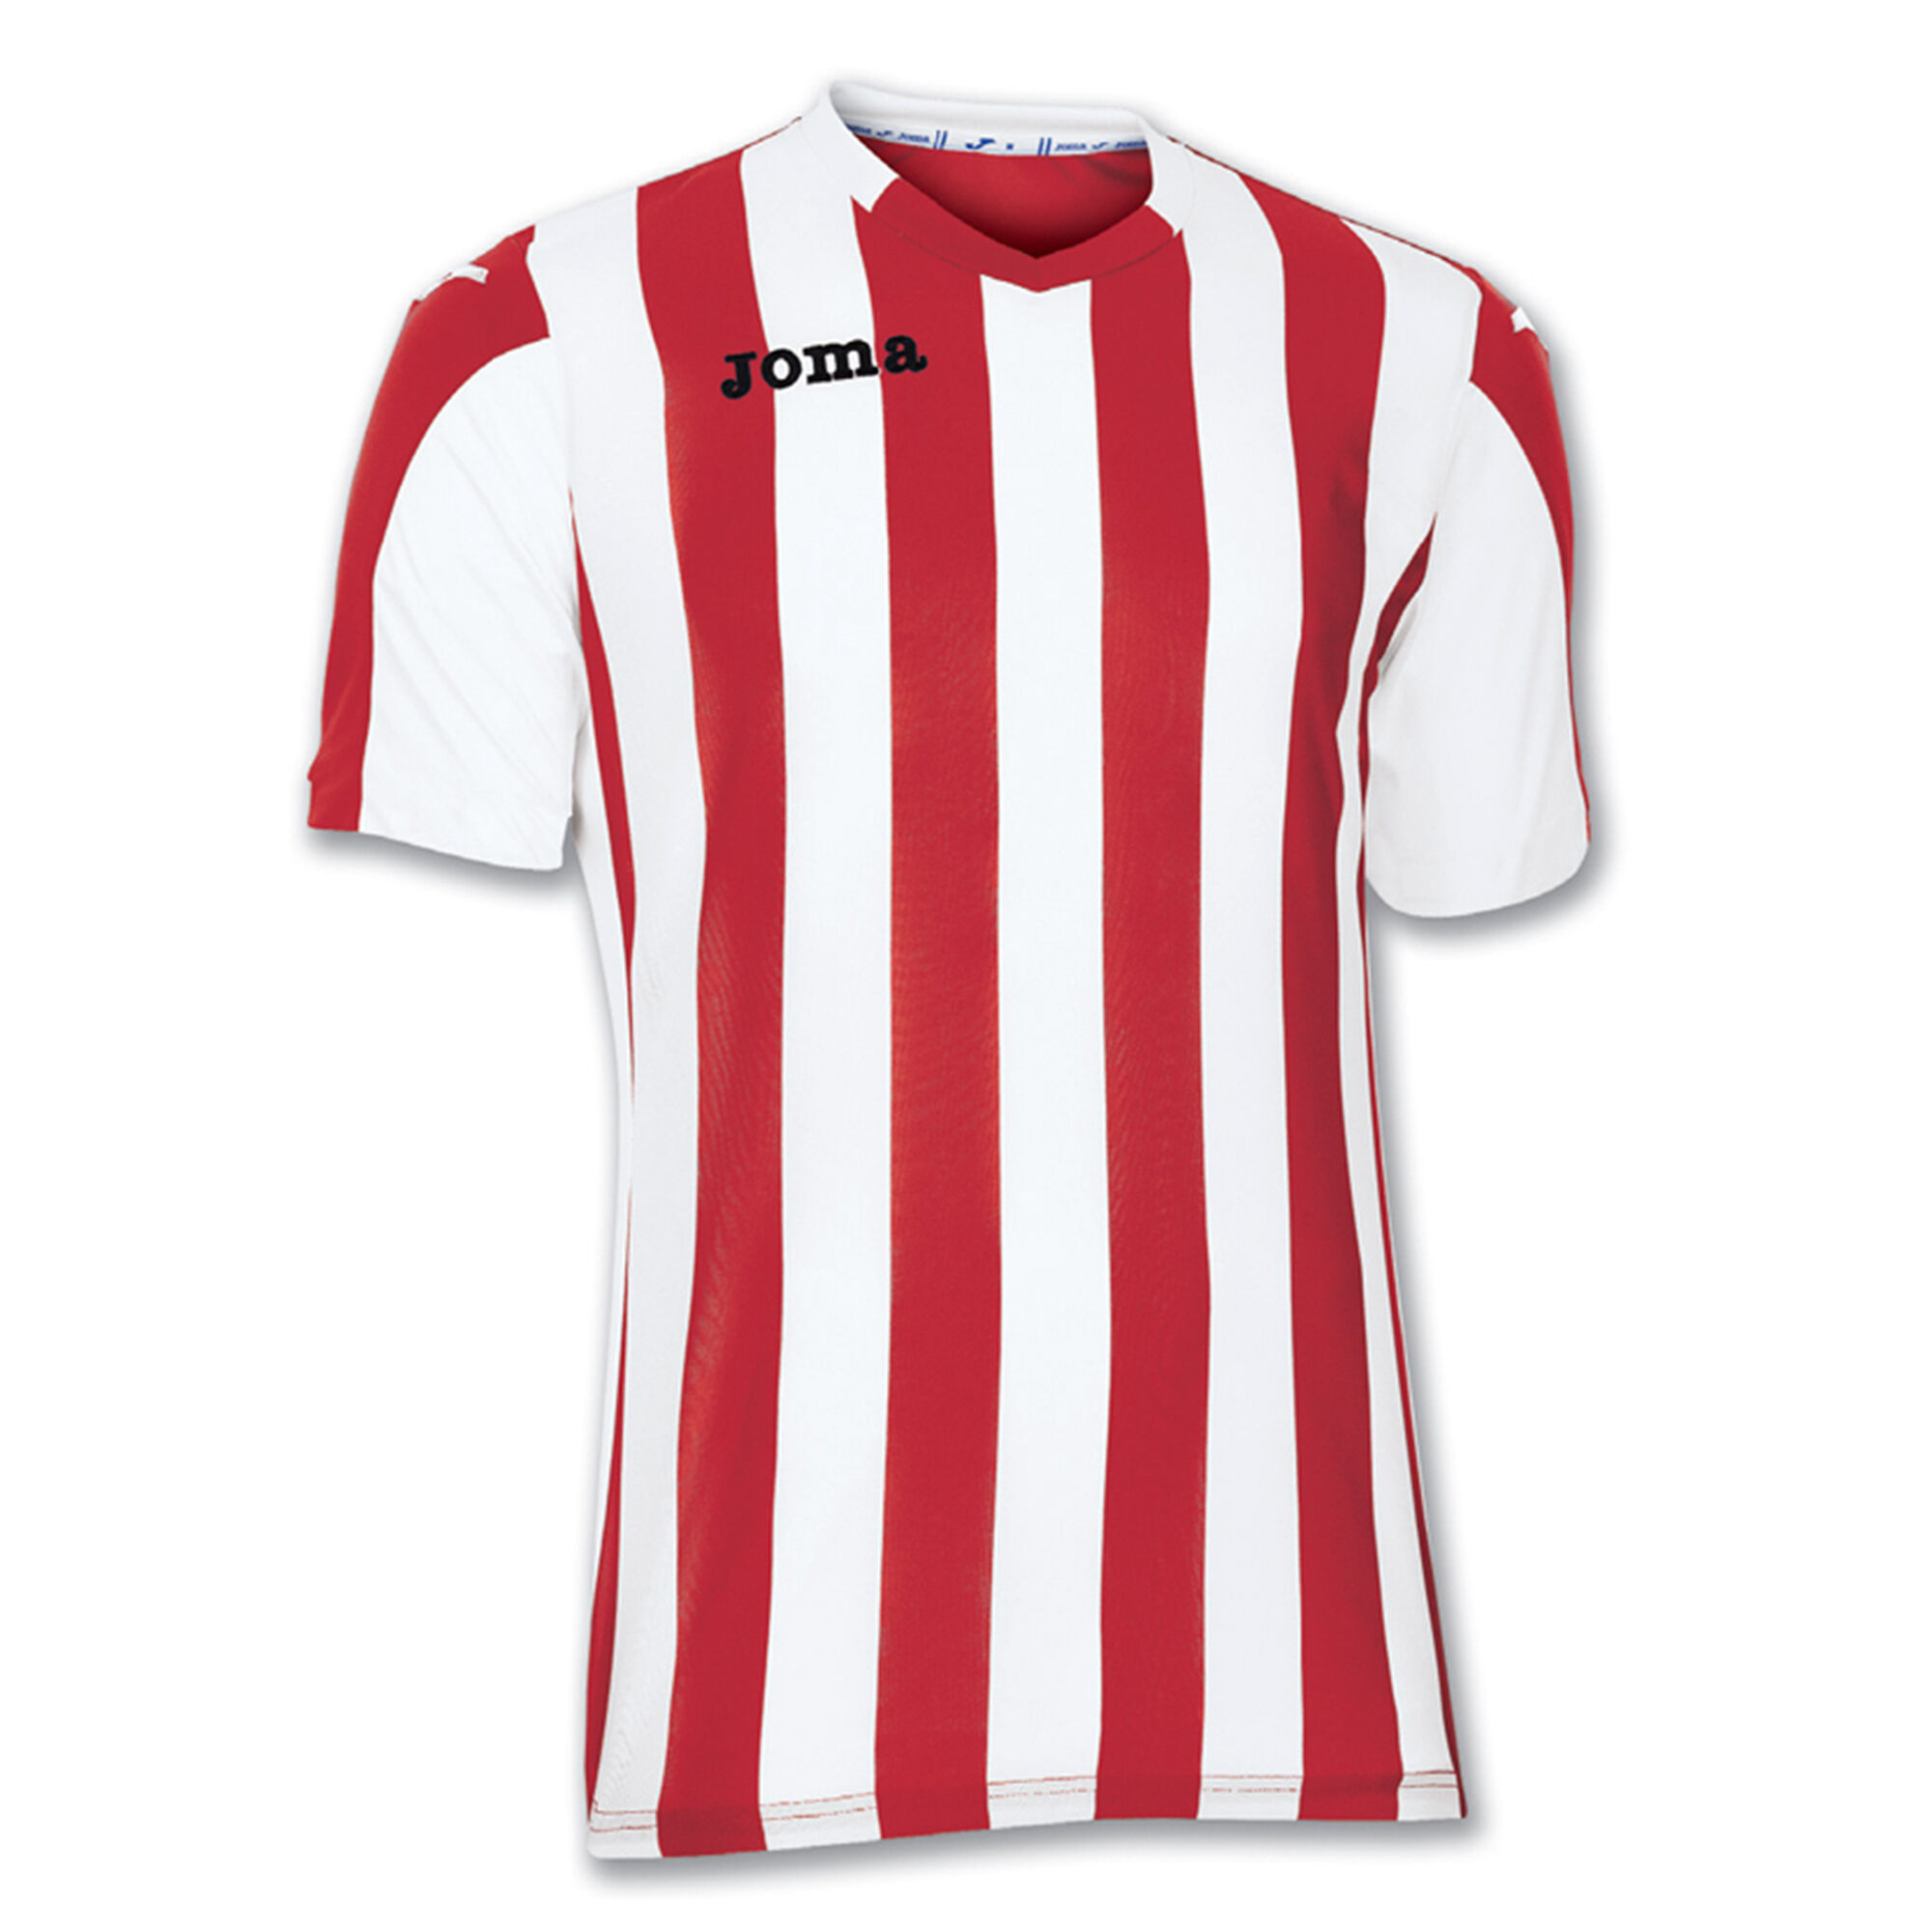 MAILLOT MANCHES COURTES HOMME COPA ROUGE BLANC